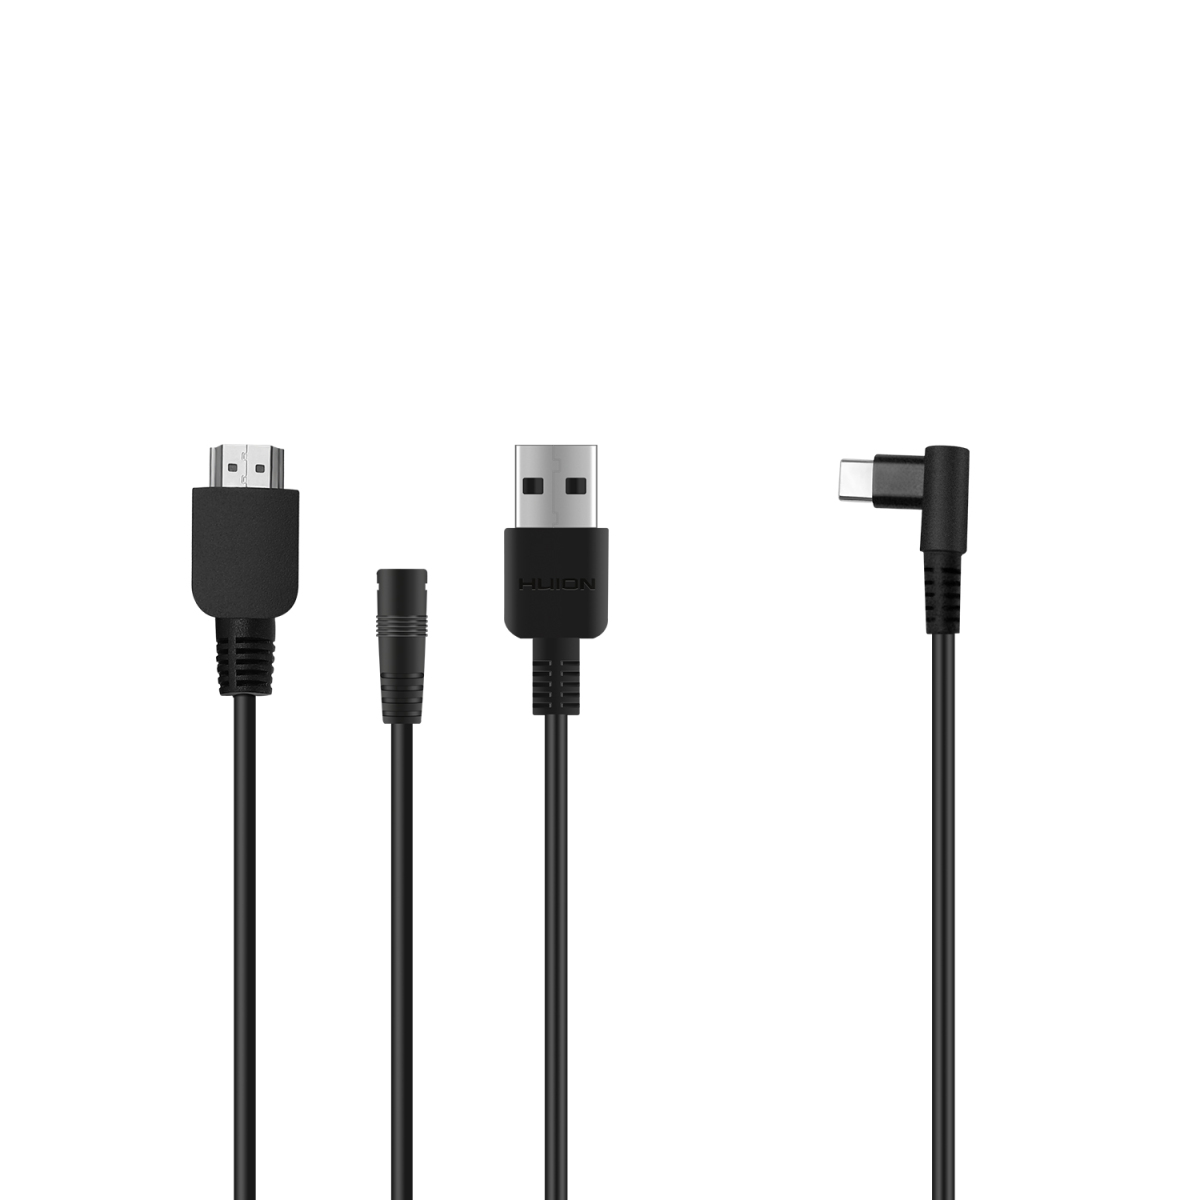 USB-C to USB-C Cable for Huion Kamvas 13 and Kamvas 22 Series  Huion  Official Store: Drawing Tablets, Pen Tablets, Pen Display, Led Light Pad